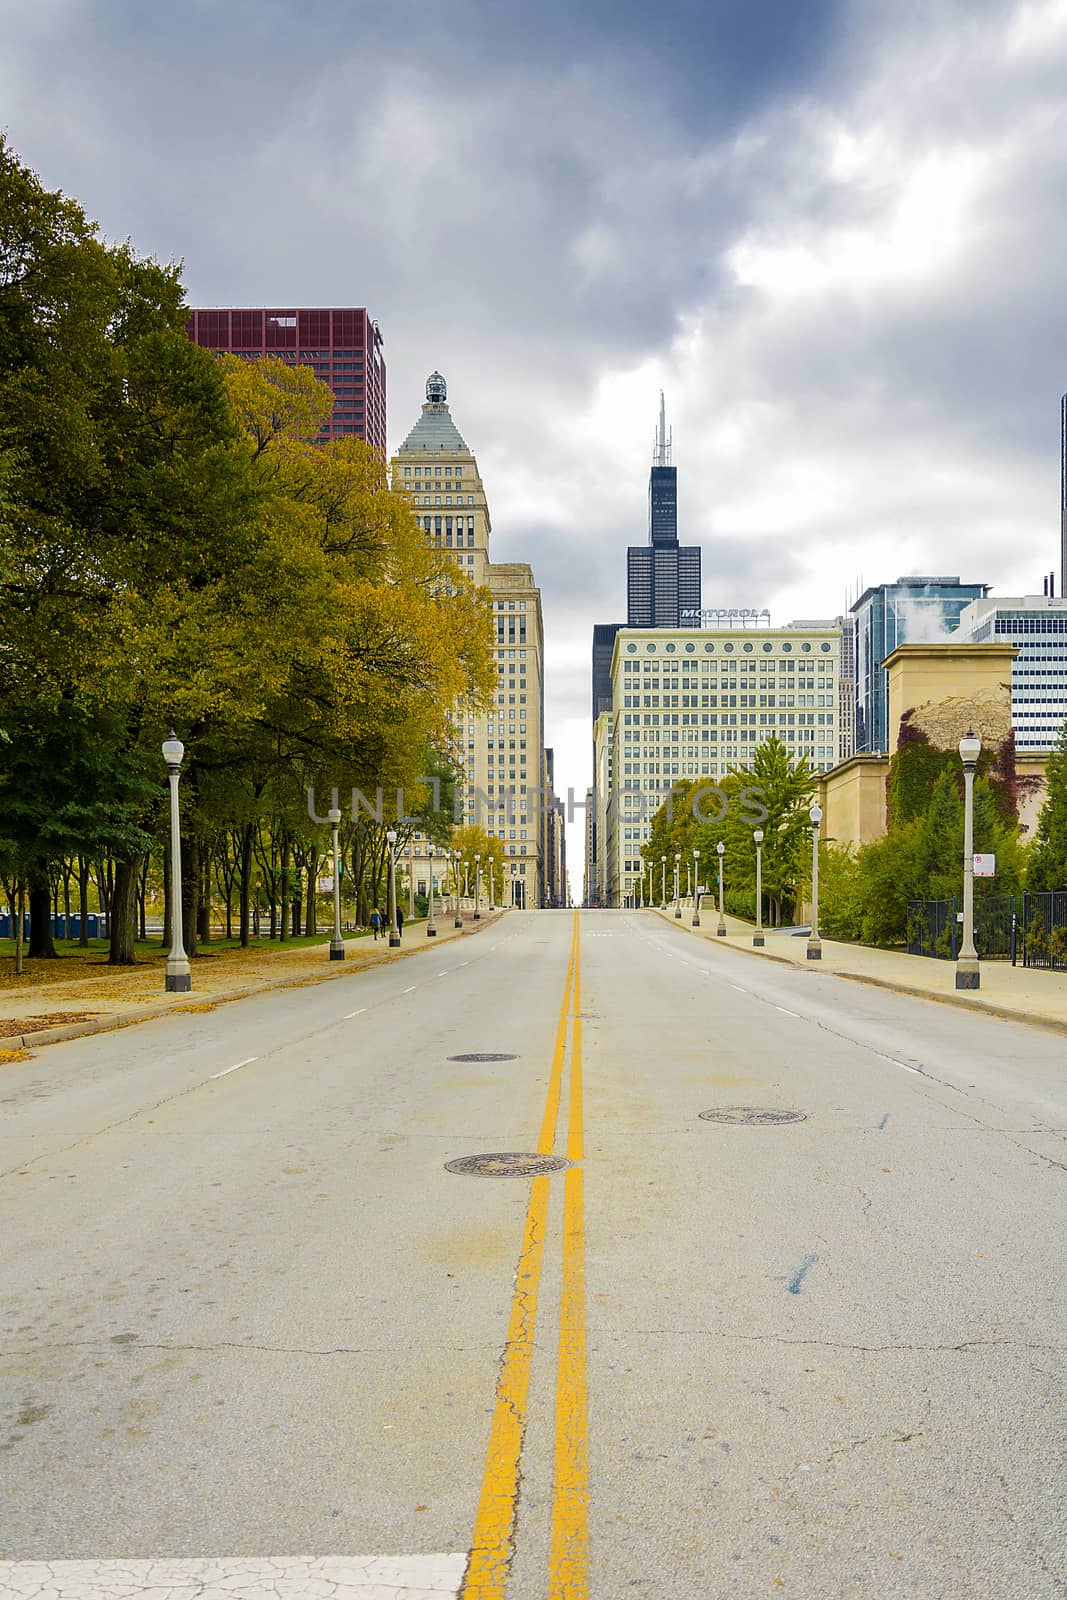 Chicago, IL, USA, october 27, 2016: Jackson Boulevard in downtown Chicago. Chicago is the 3rd most populous US city with 2.7 million residents 8.7 million in its urban area .